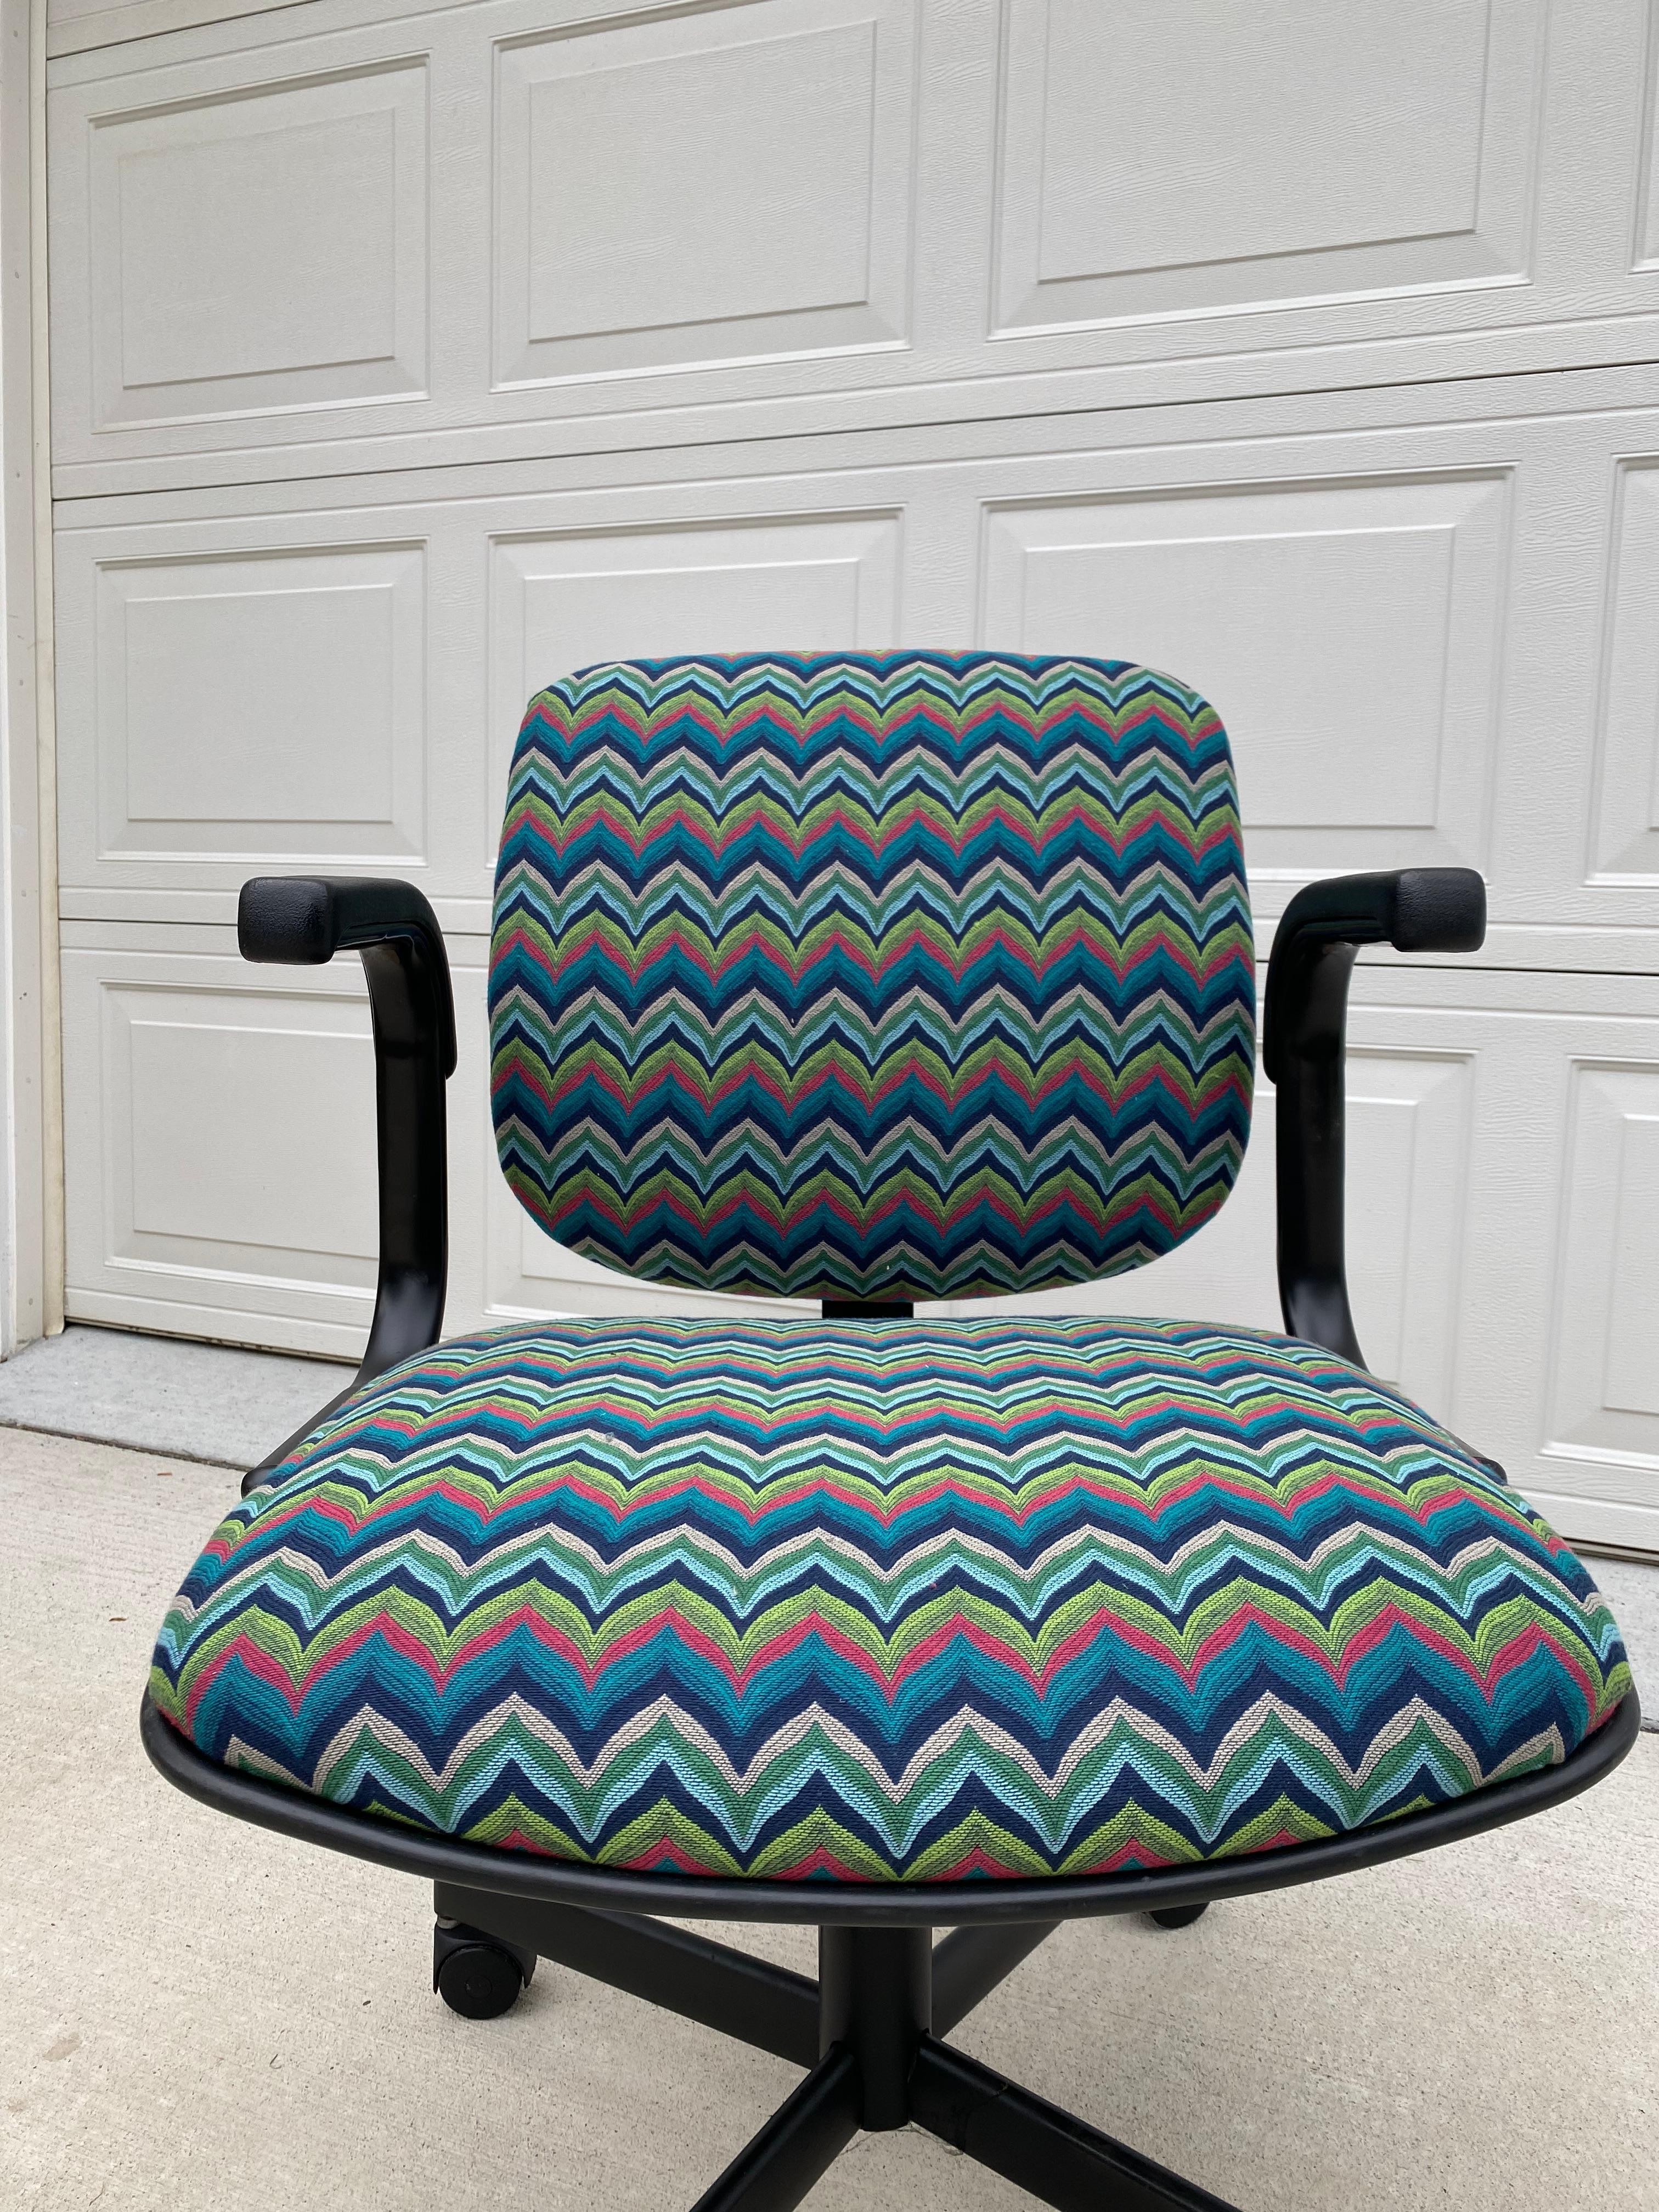 1980s office chair